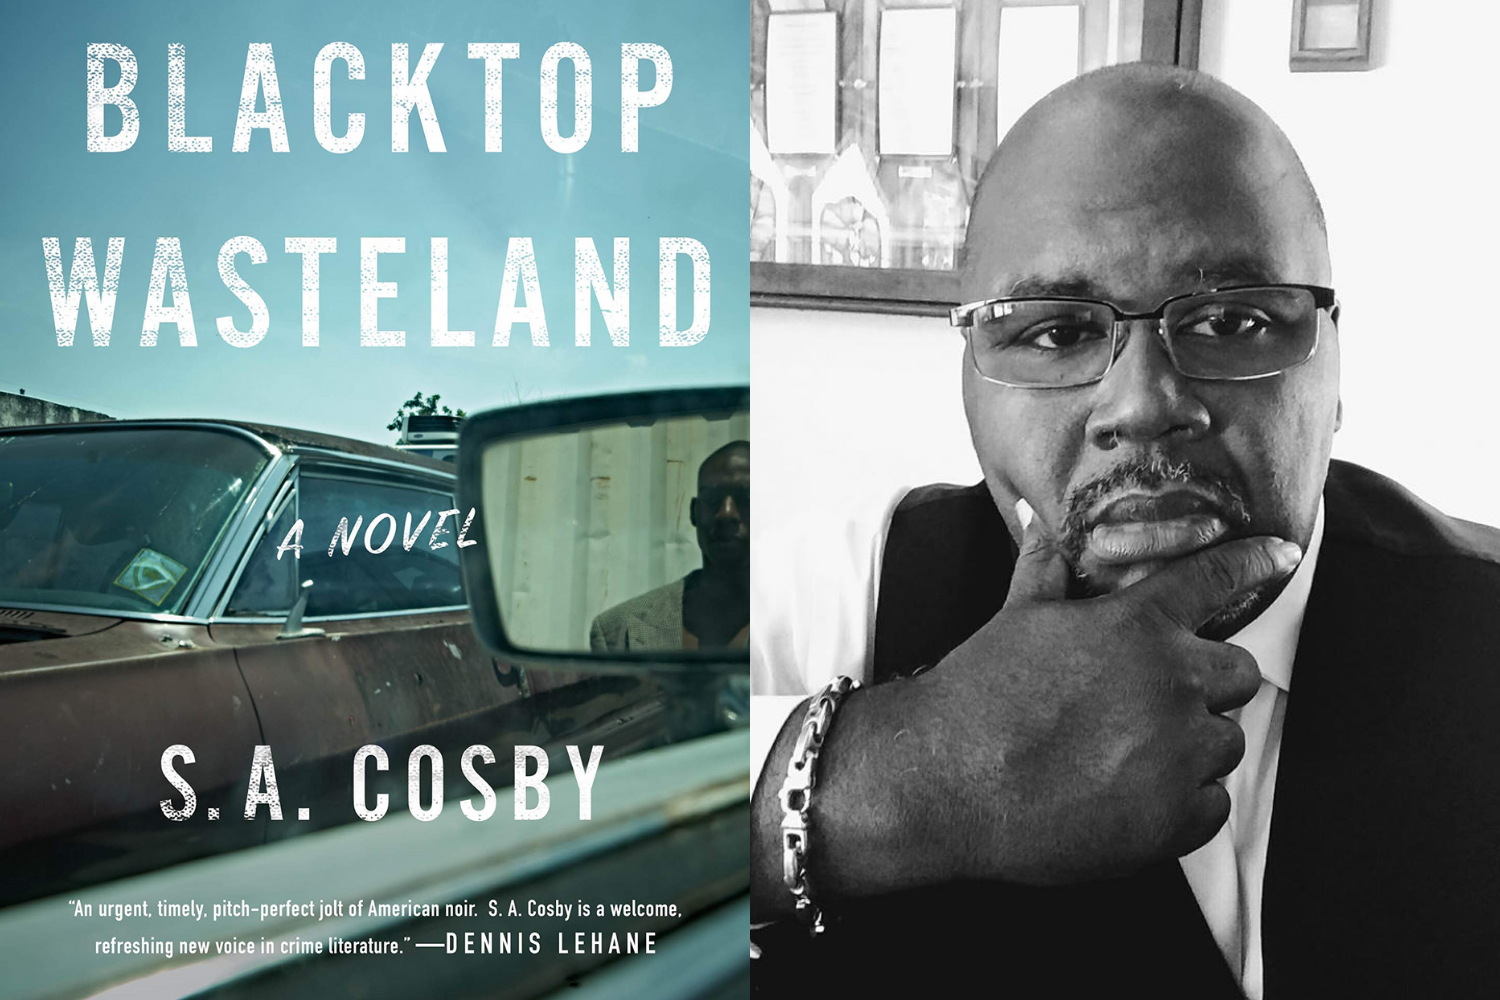 Blacktop Wasteland by S.A. Cosby